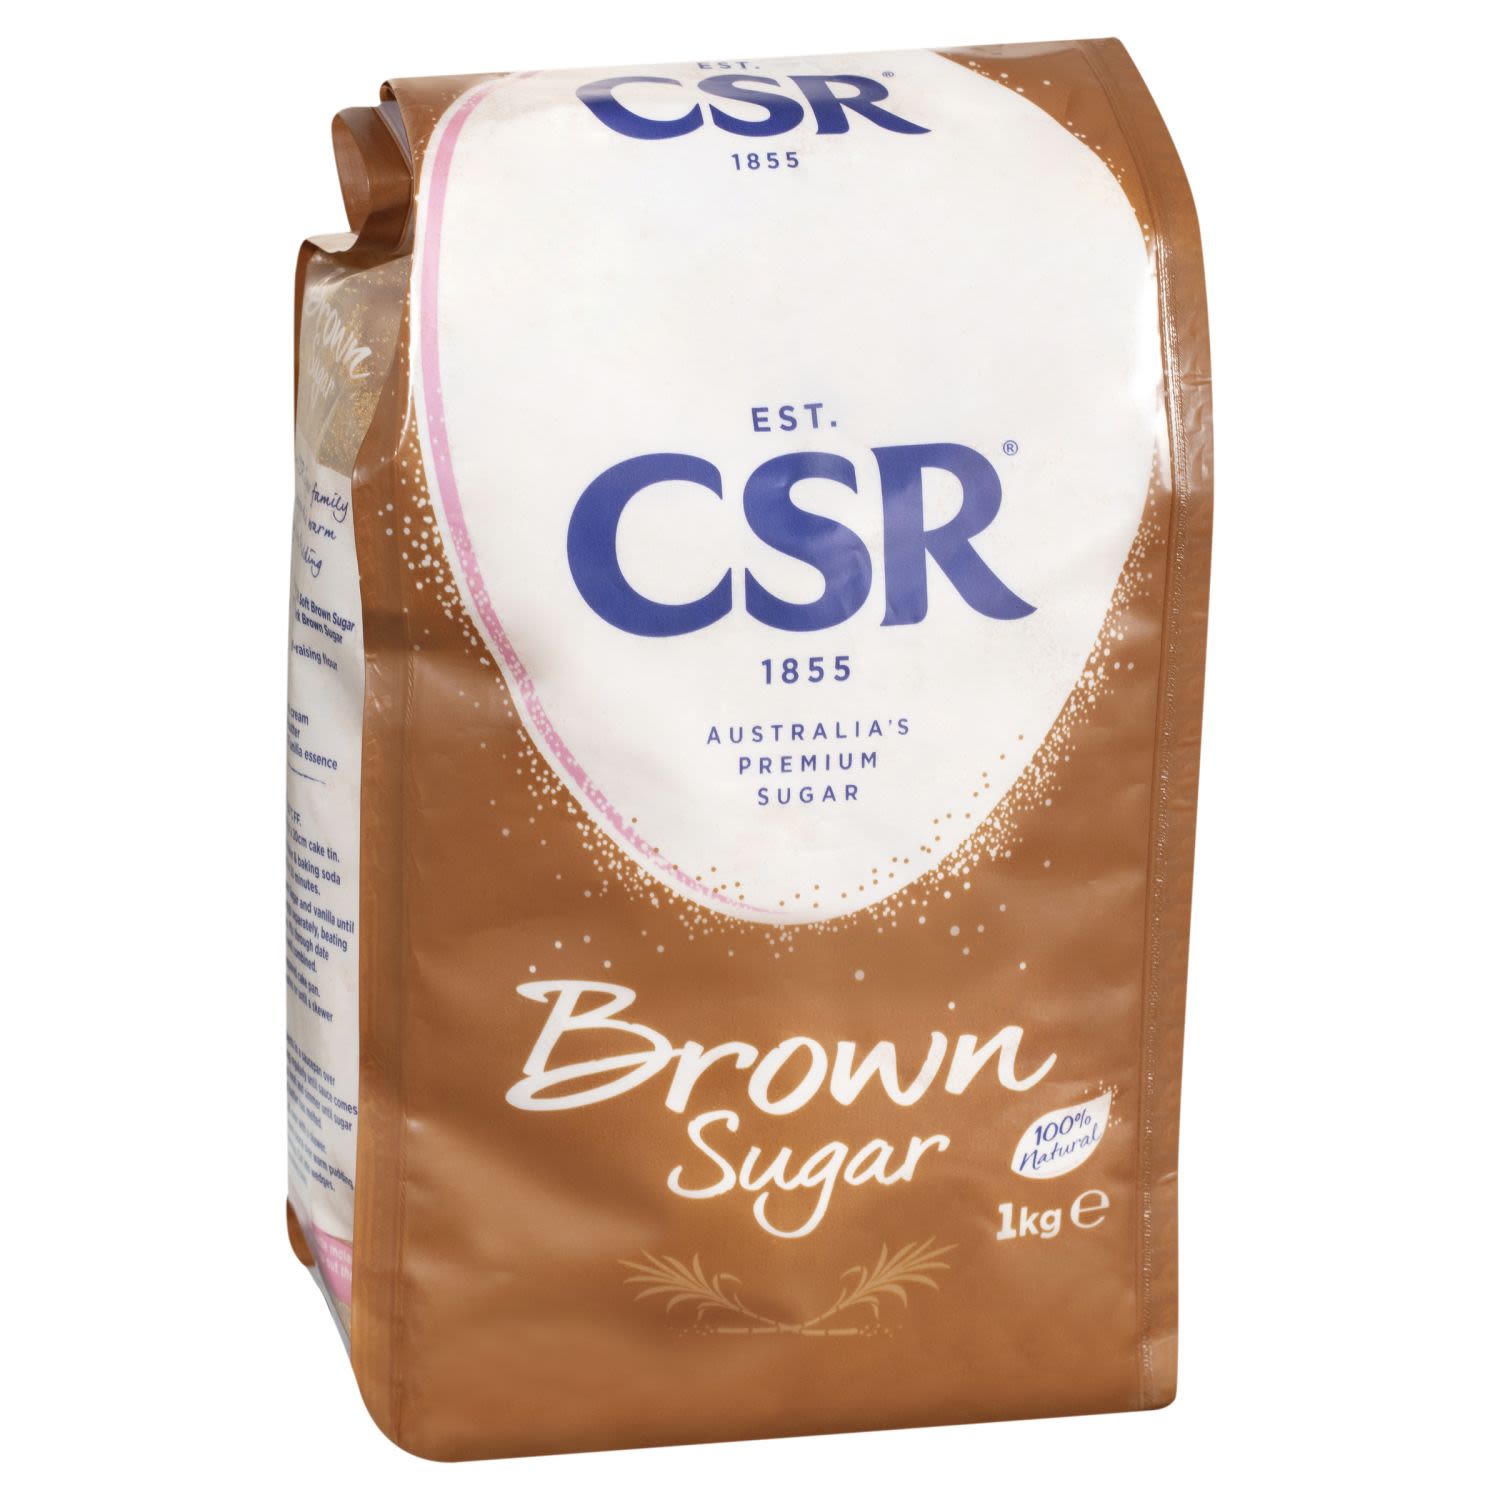 A versatile ingredient suitable for cooking, baking and sweetening beverages, CSR Brown Sugar is a real kitchen essential. Known for it's delicate, caramelly sweetness, this sugar brings the perfect flavour to chewy choc chip cookies, cinnamon bars and toffee cakes. CSR Brown Sugar is 100% natural and is also a great ingredient in barbecue glazes and salad dressings.<br /> <br /> <br /><br />Country of Origin: Proudly Australian made